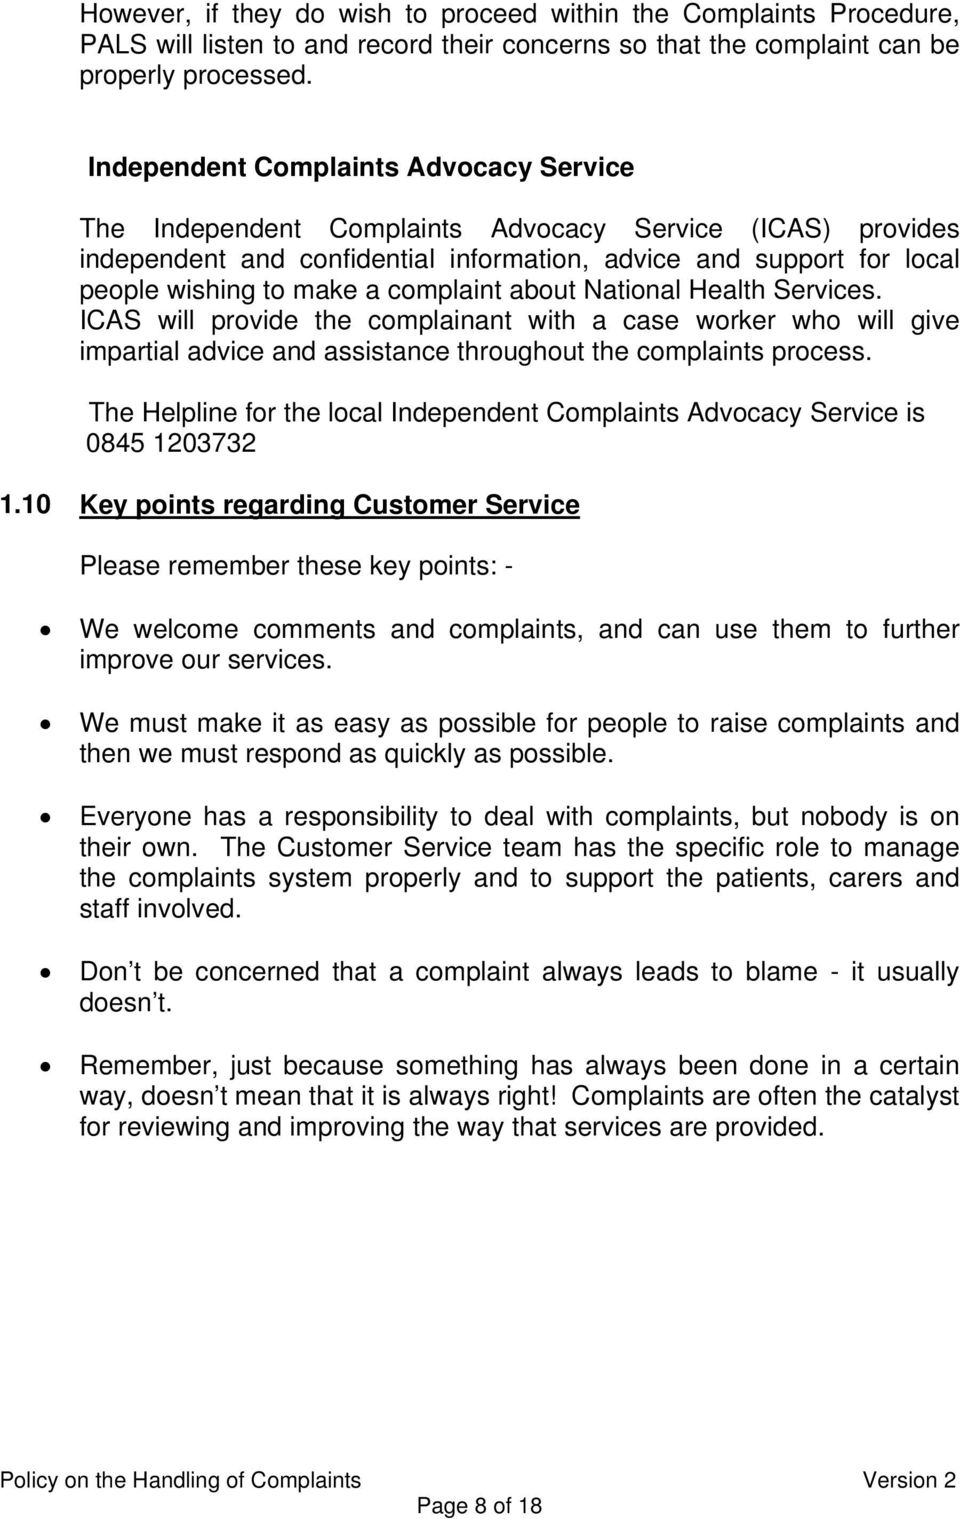 complaint about National Health Services. ICAS will provide the complainant with a case worker who will give impartial advice and assistance throughout the complaints process.